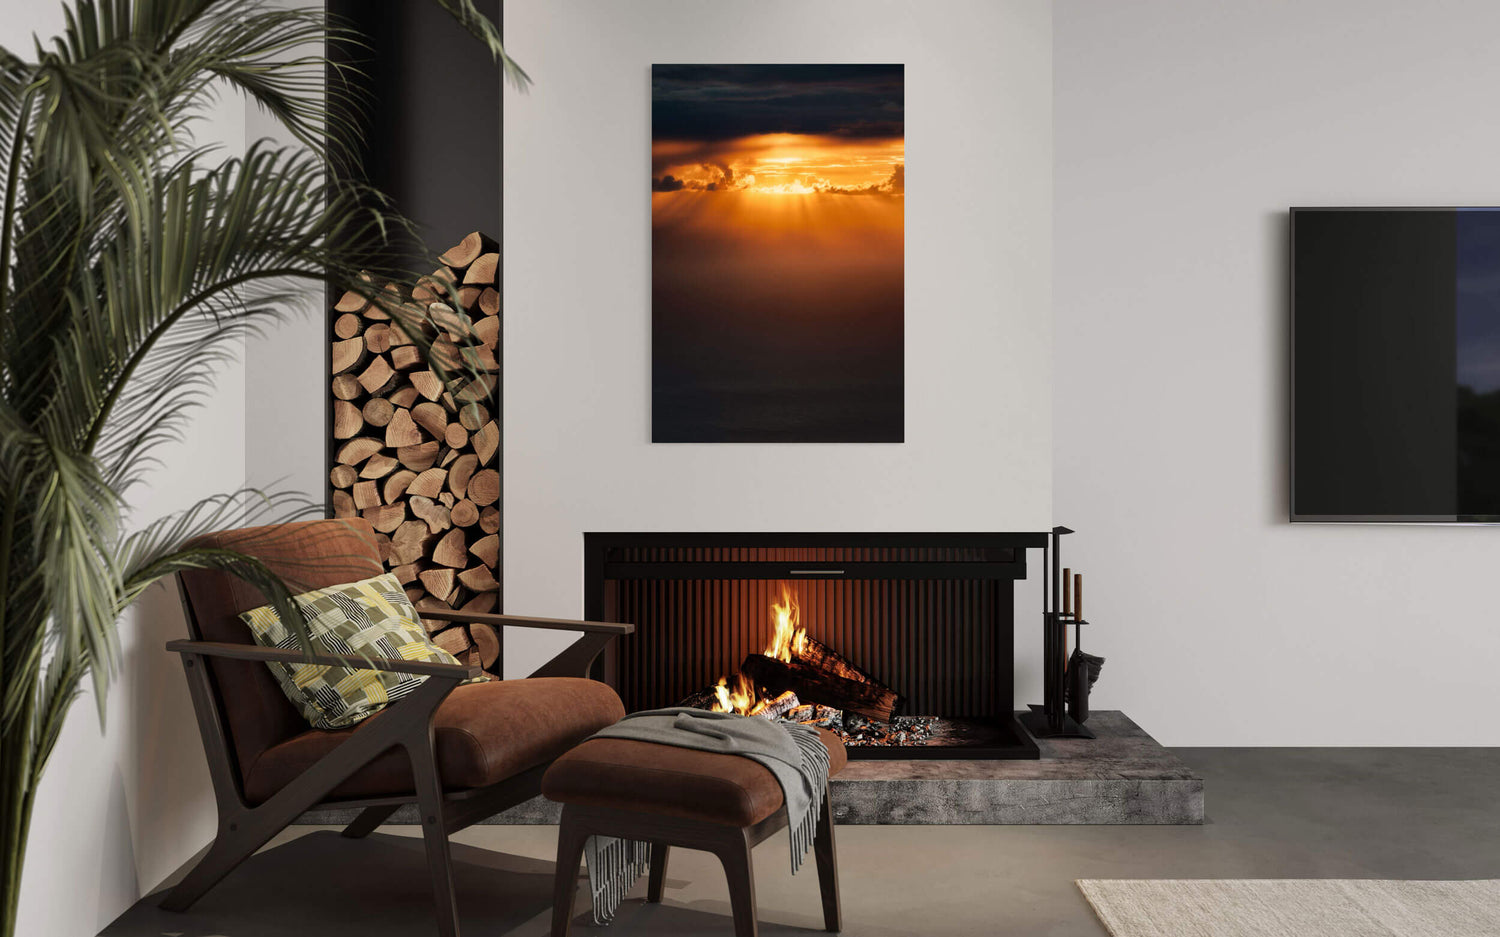 A sunset picture from the Napali Coast on Kauai hangs in a living room.